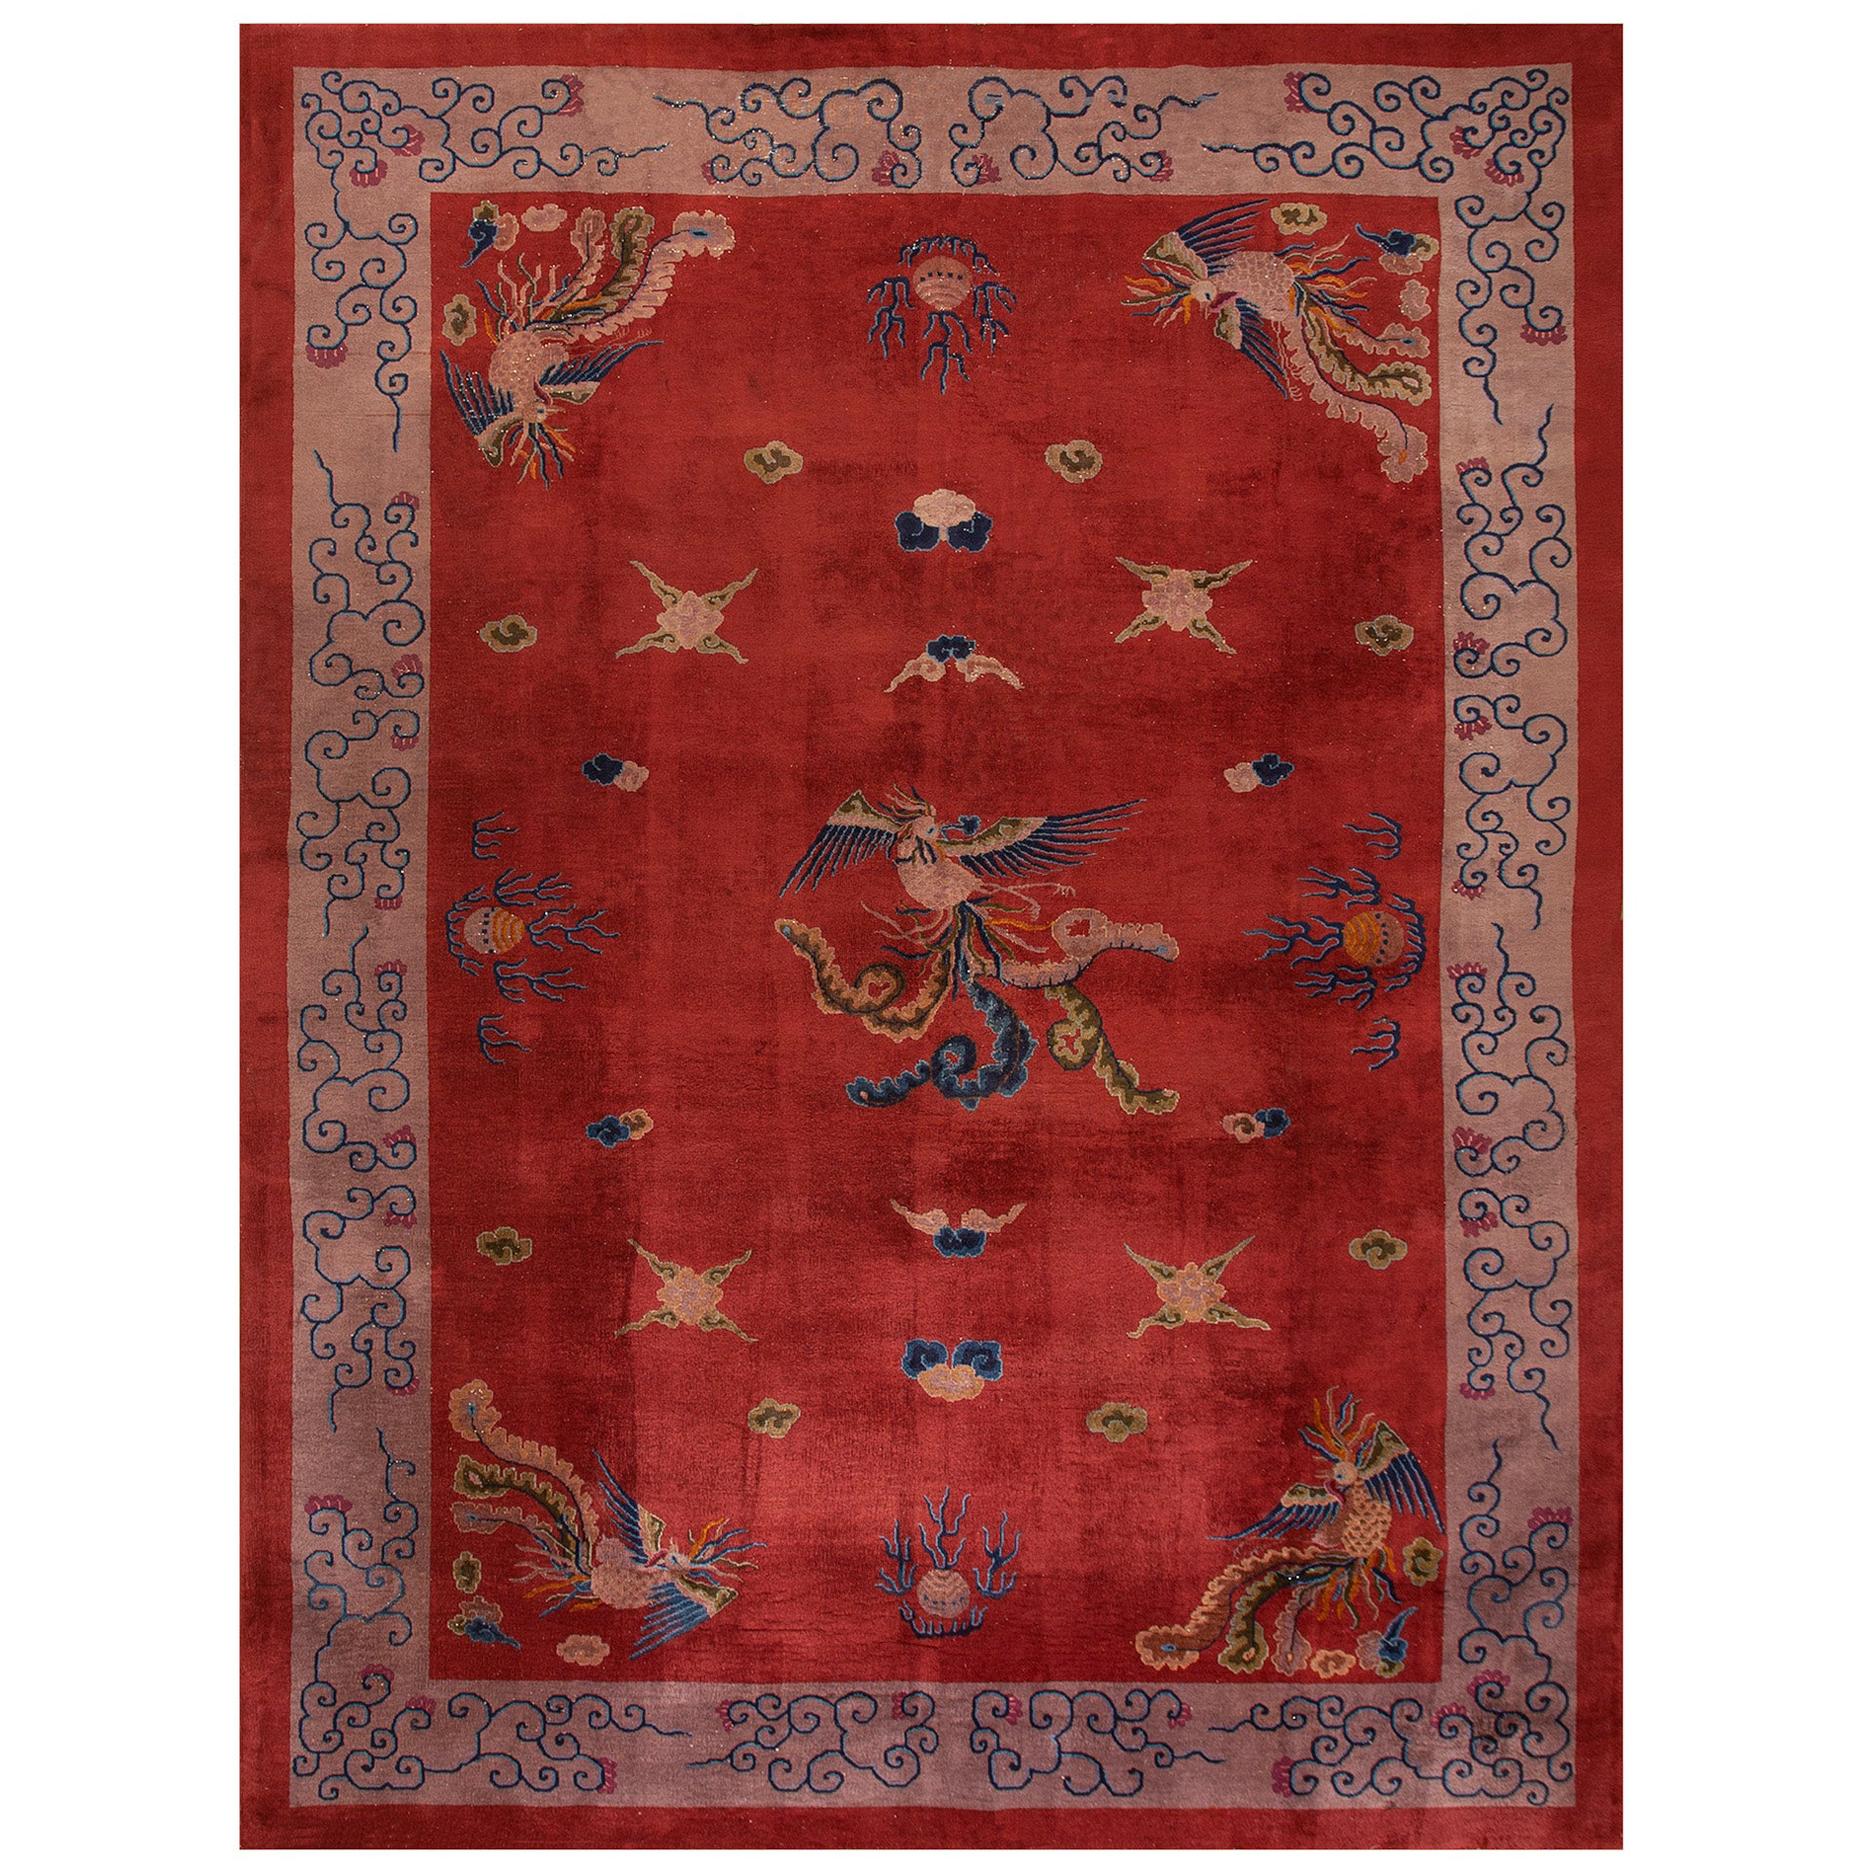 1920s Chinese Art Deco Carpet ( 10' x 13'6" - 305 x 412 ) For Sale